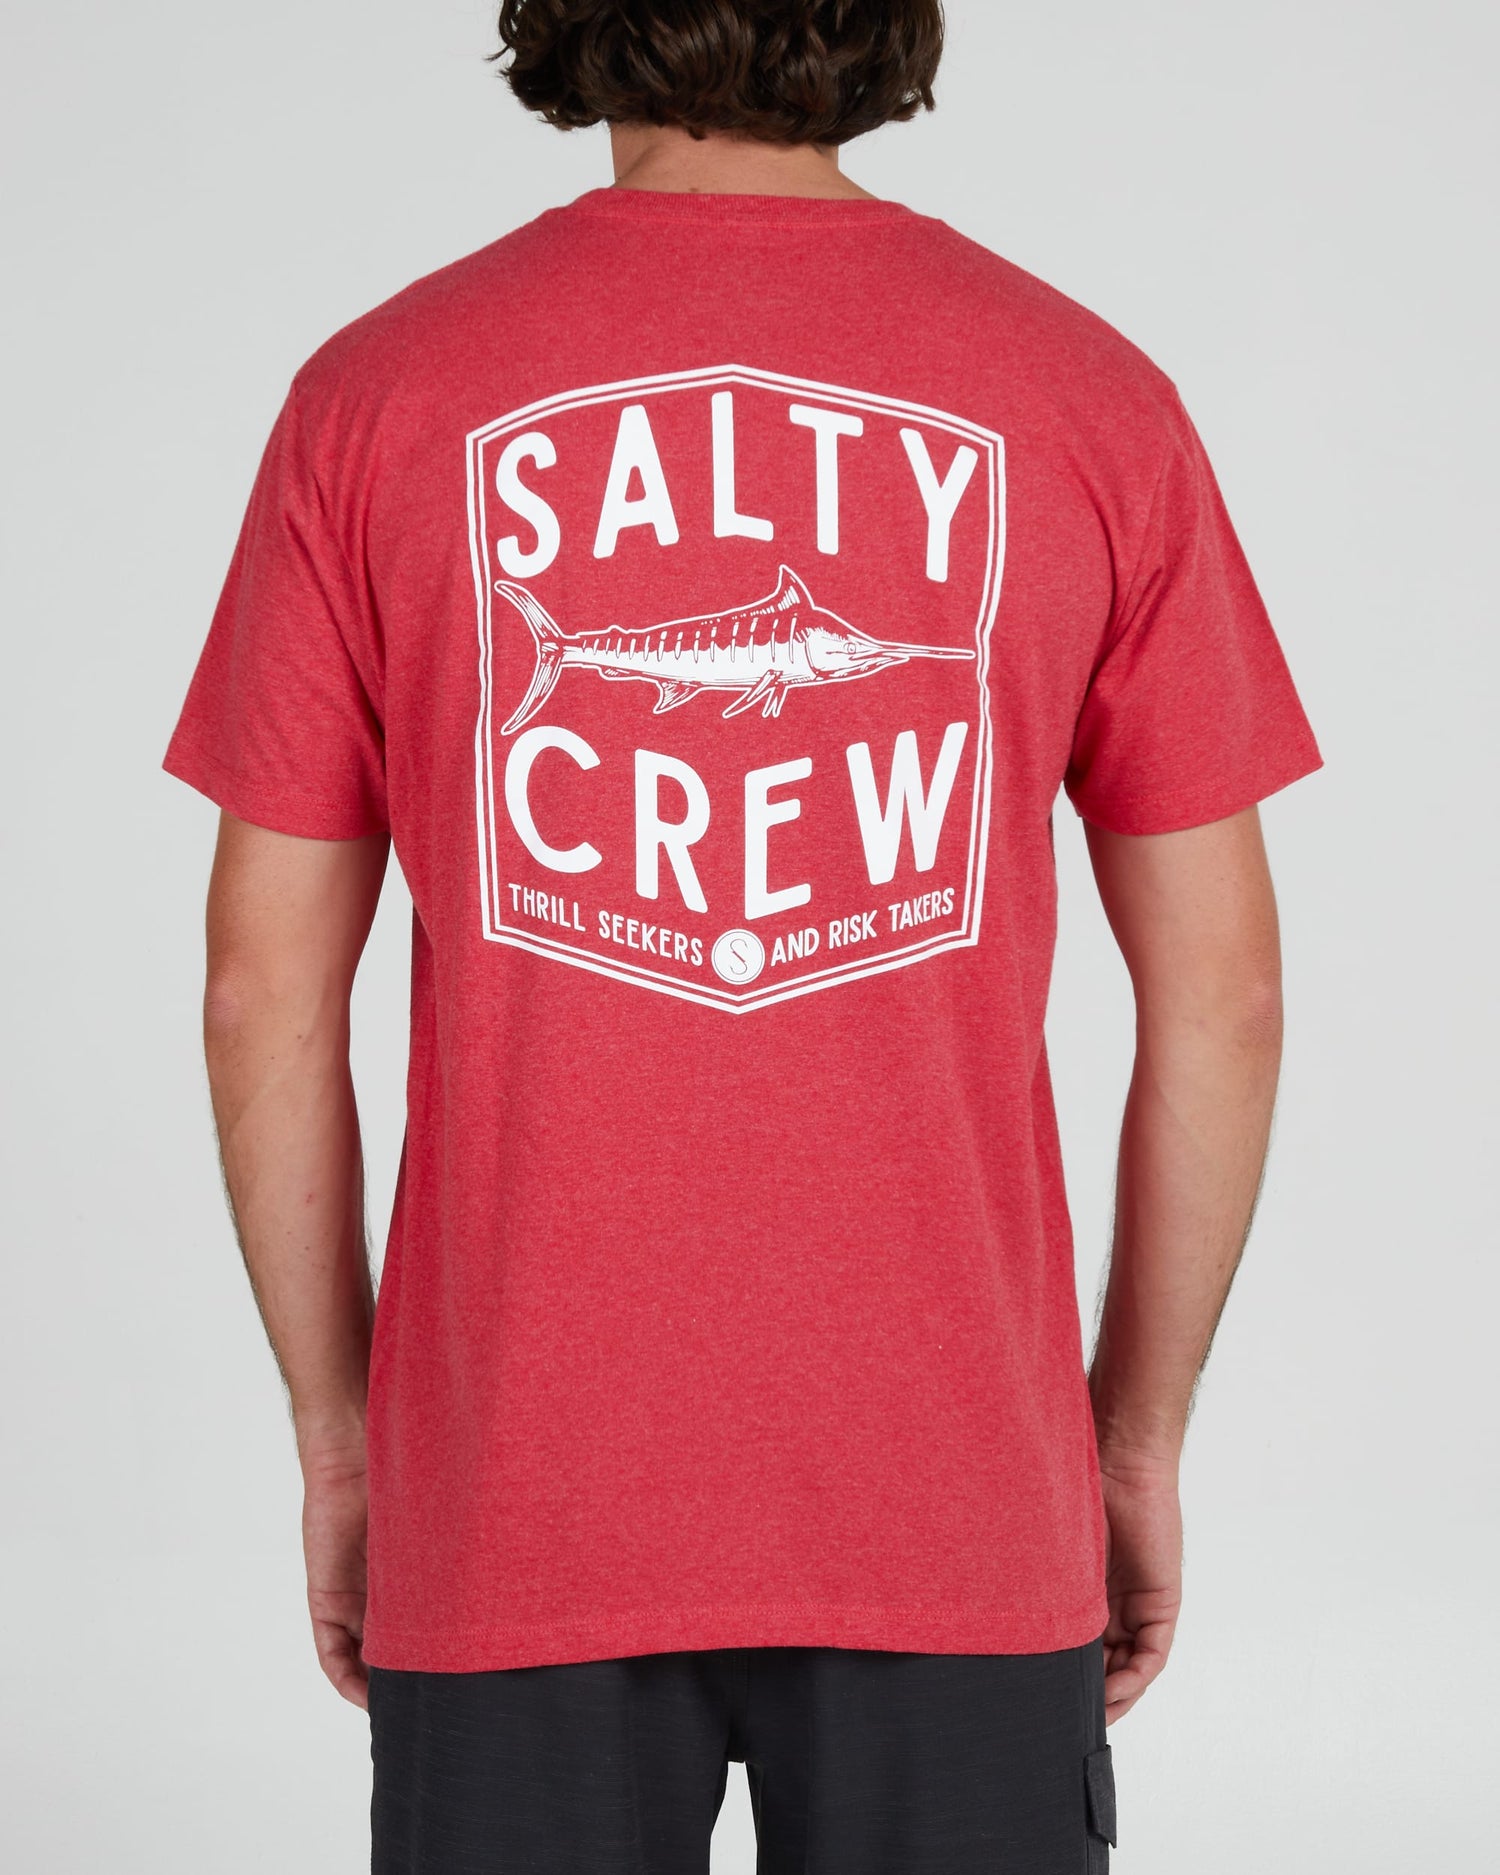 Salty crew T-SHIRTS S/S FISHERY STANDARD S/S TEE - Red Heather in Red Heather